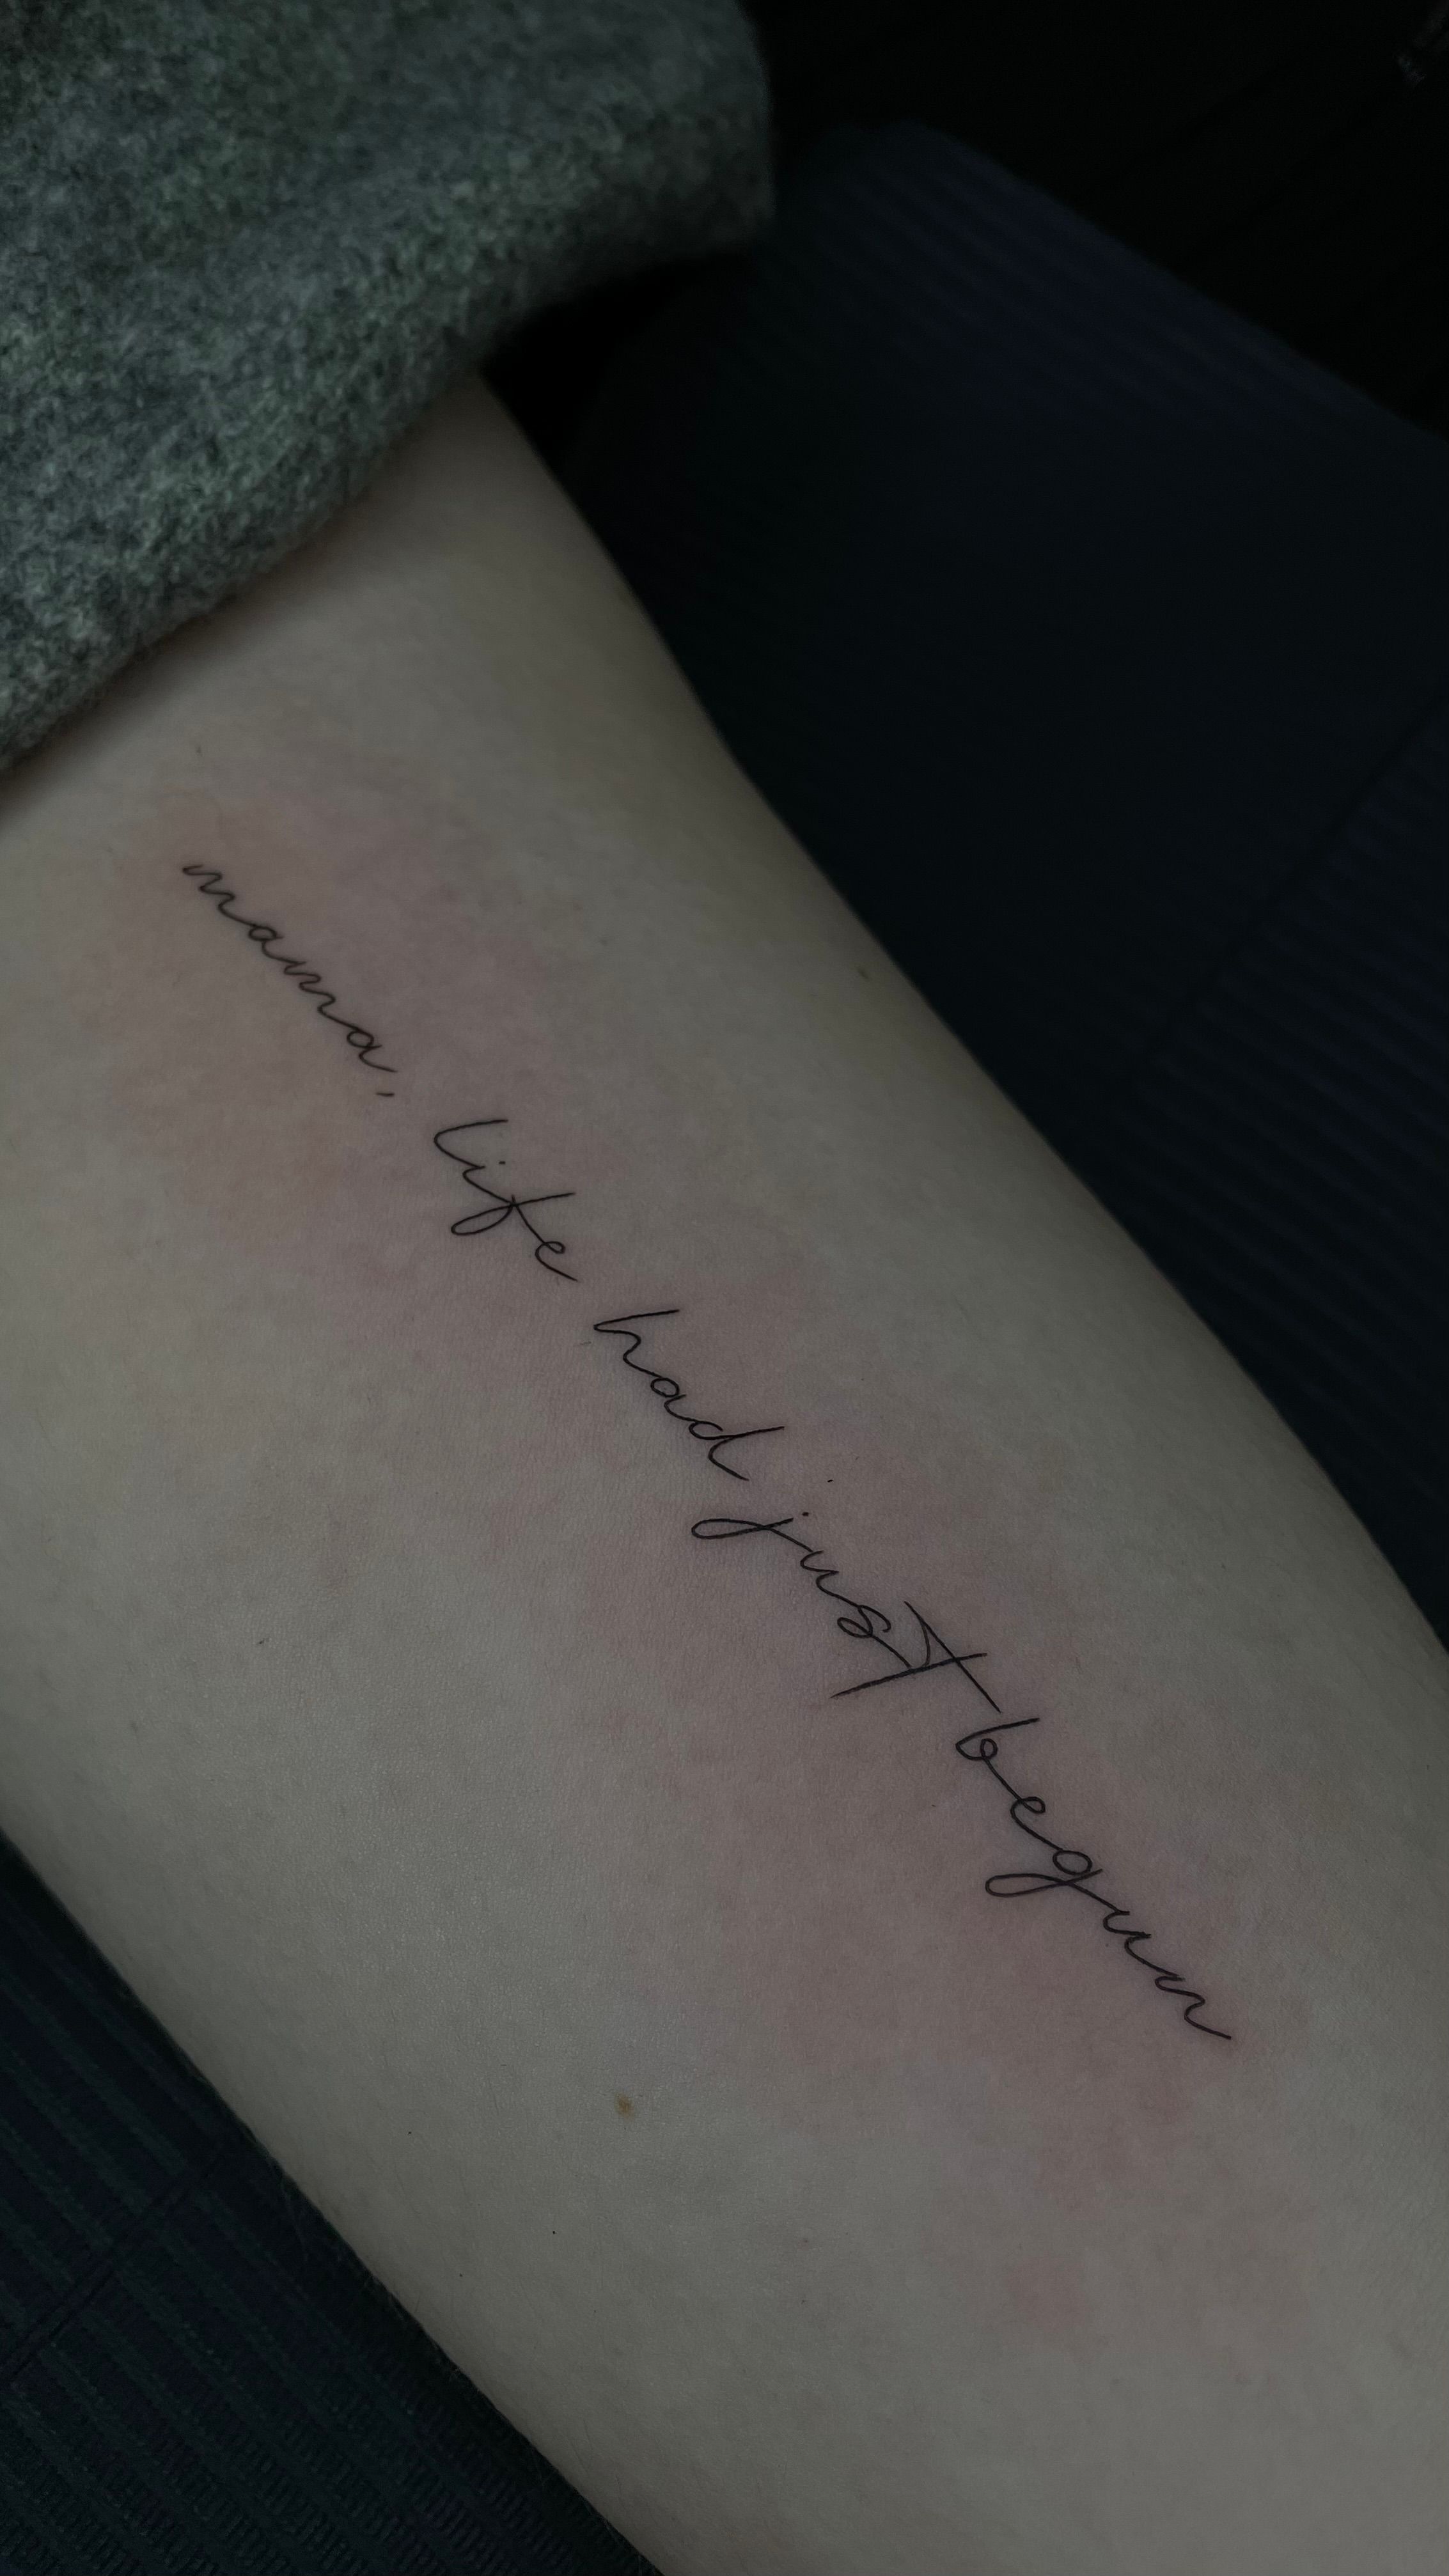 radicalcourse.org on Tumblr: @radicalcourse Live in the moment tattoo.